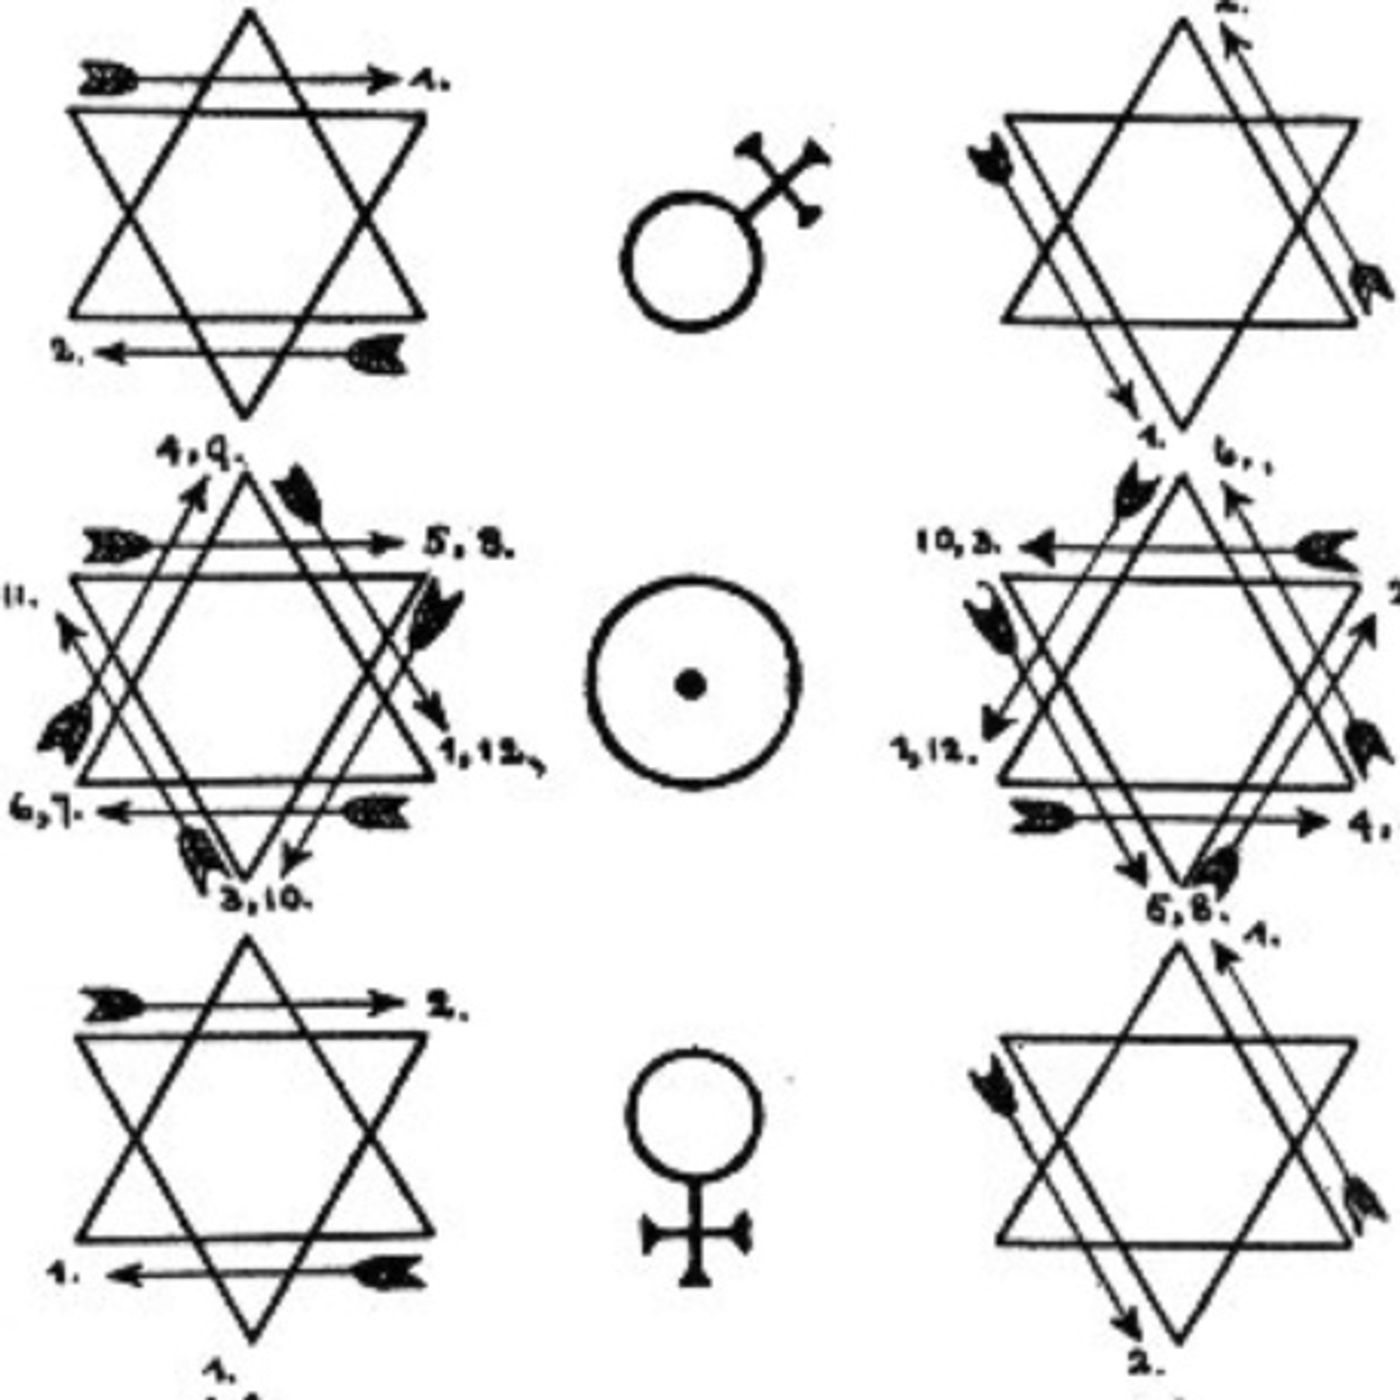 The Ritual of the Hexagram- Swastikas and the ”Star of David”